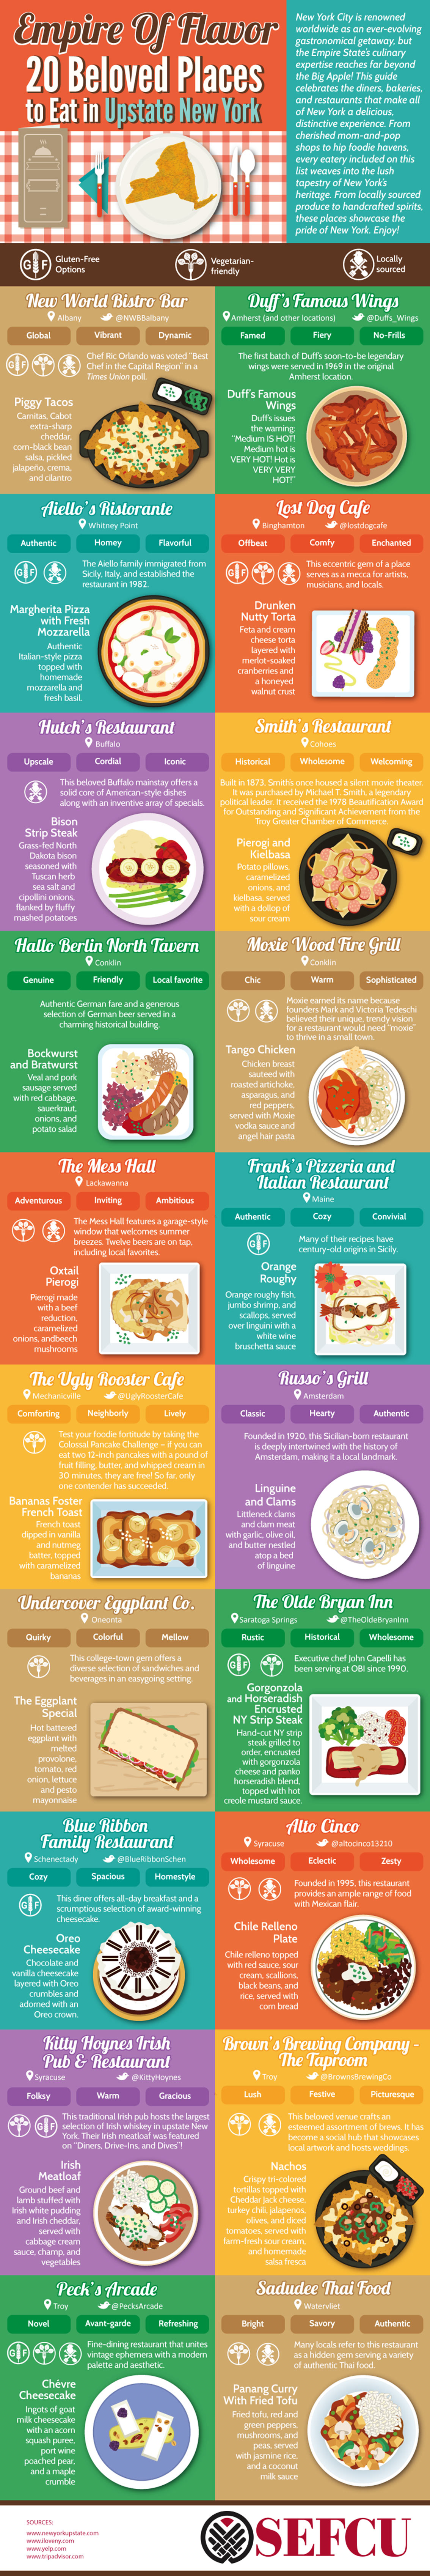 Best Restaurants To Eat in Upstate New York - Dining Infographic